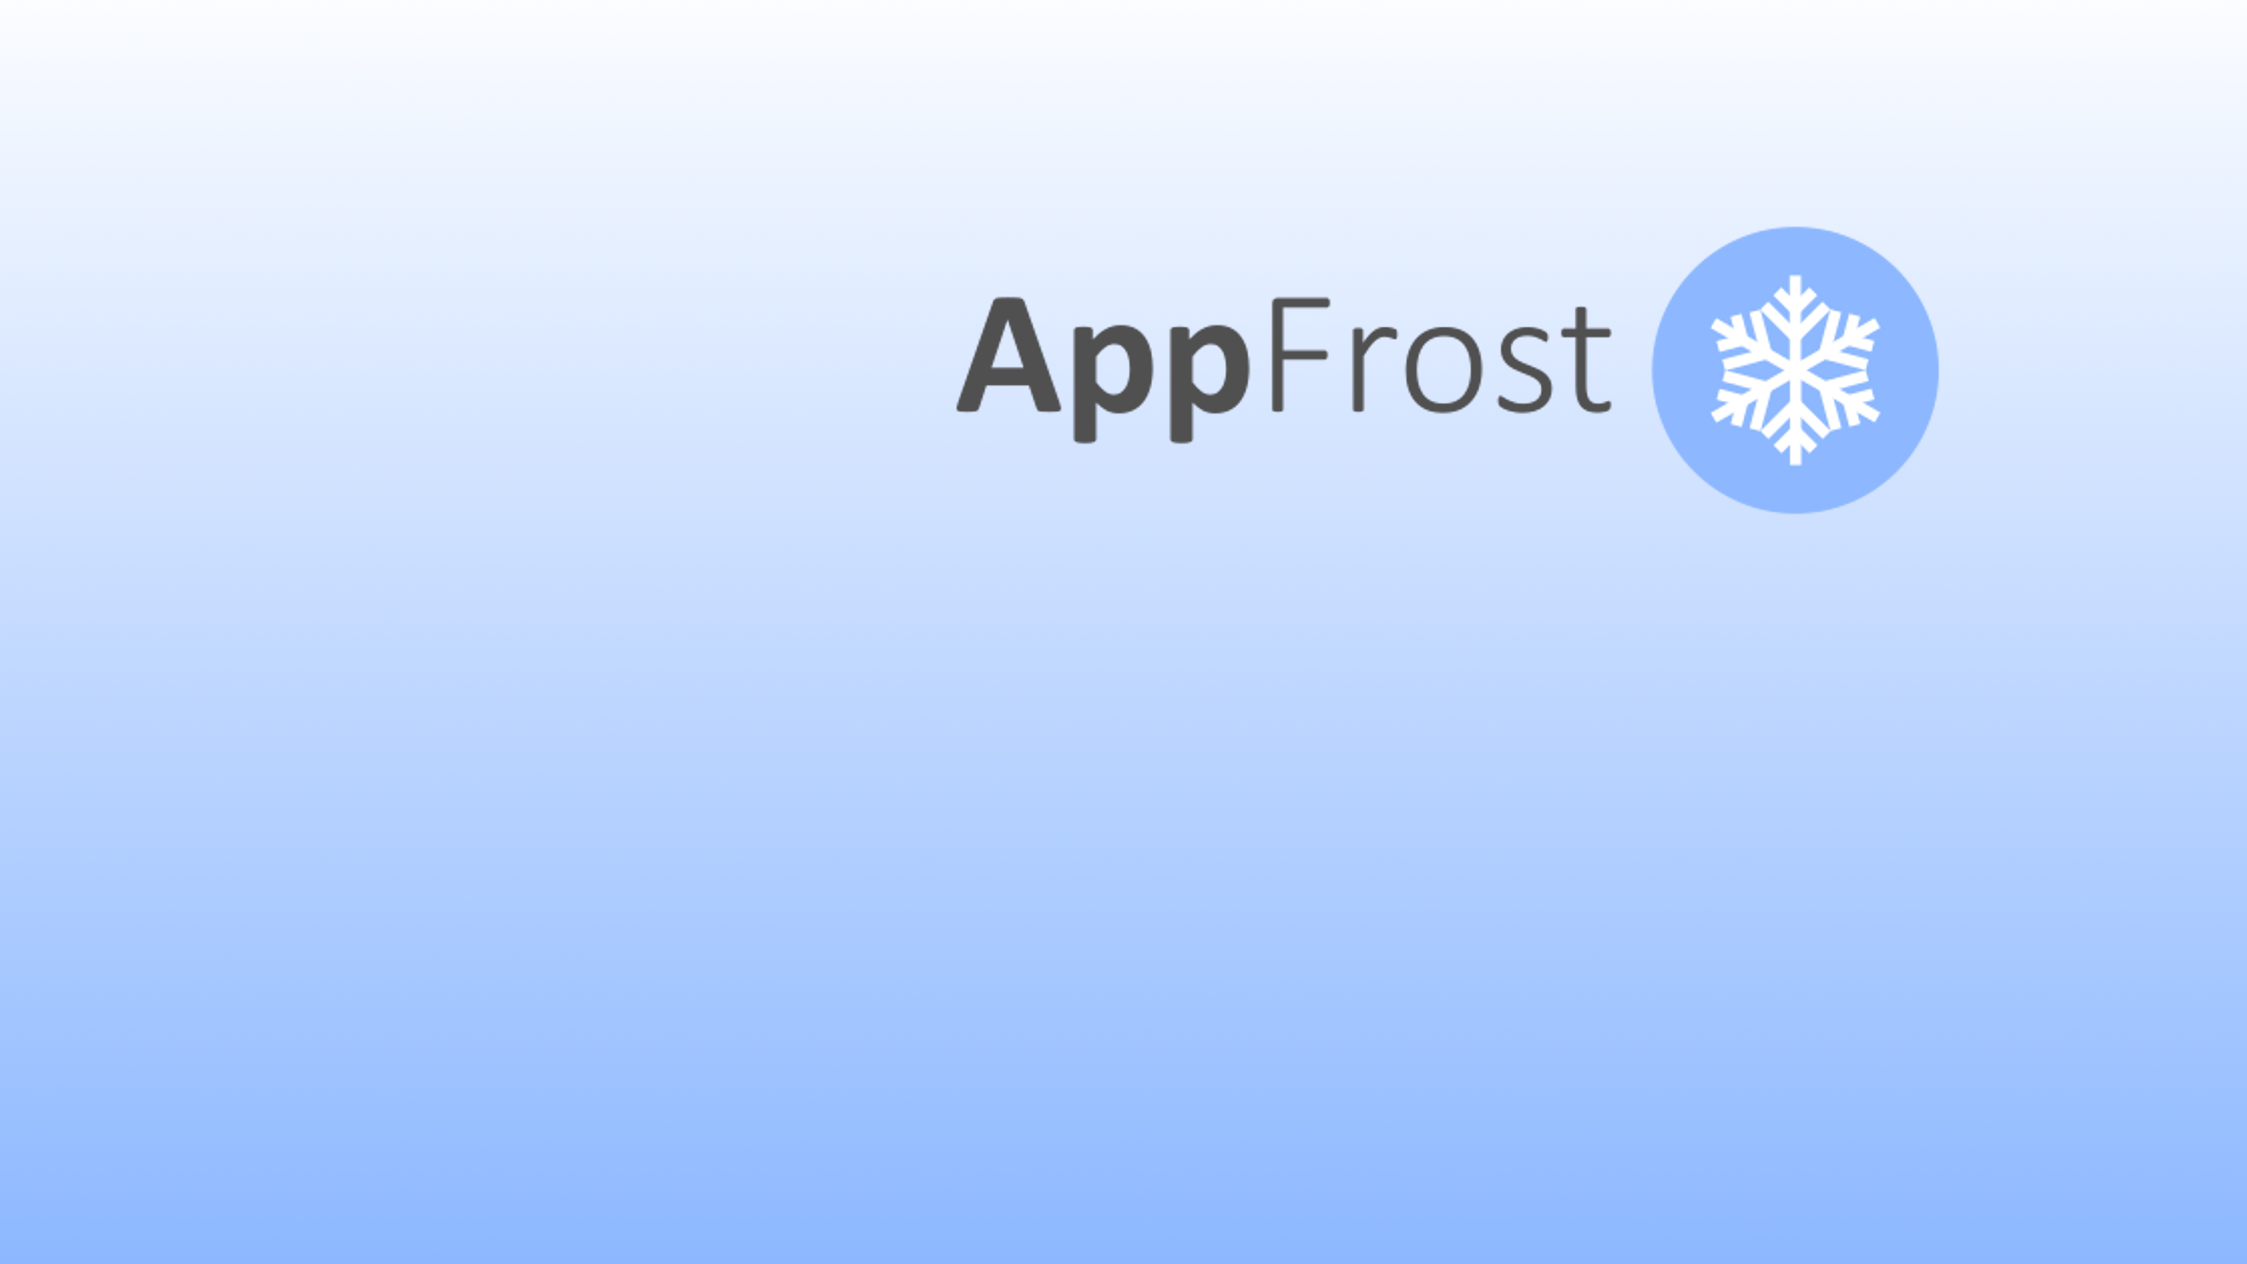 AppFrost